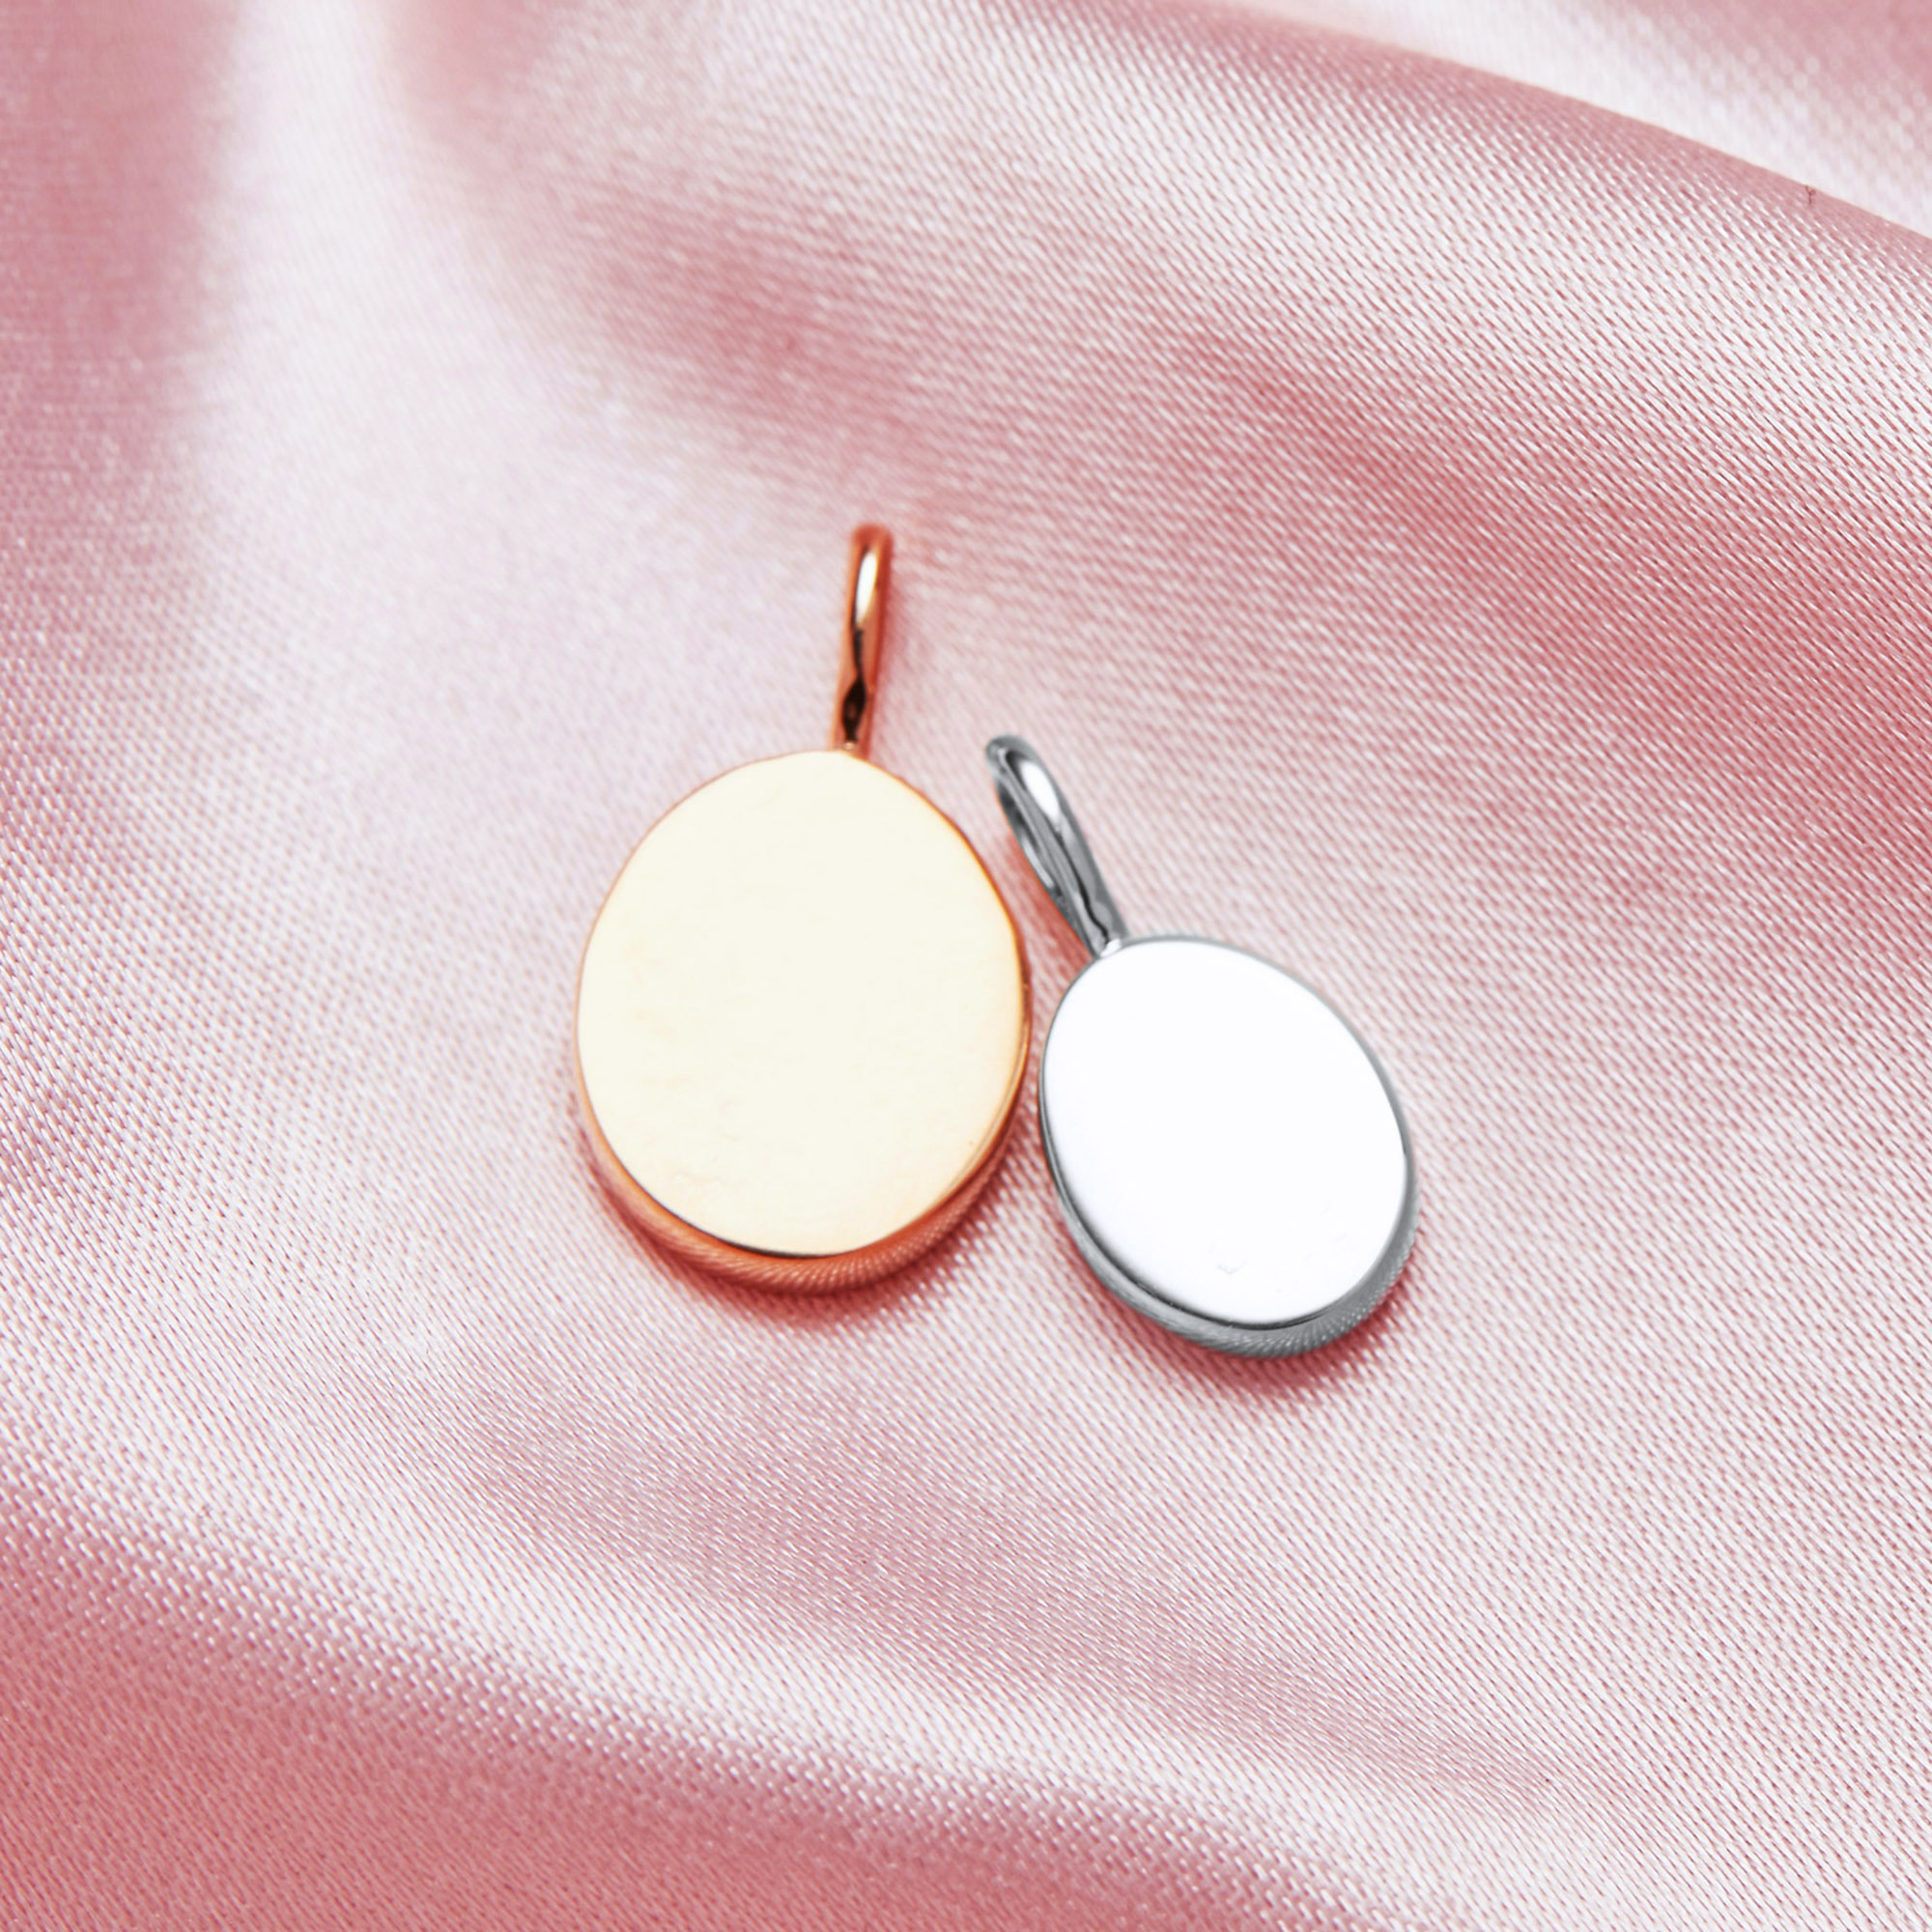 Keepsake Breast Milk Resin Oval Solid Back Pendant Bezel Settings,Solid 14K 18K Gold Pendant,Simple Charm,DIY Memory Jewelry Supplies 1421217 - Click Image to Close